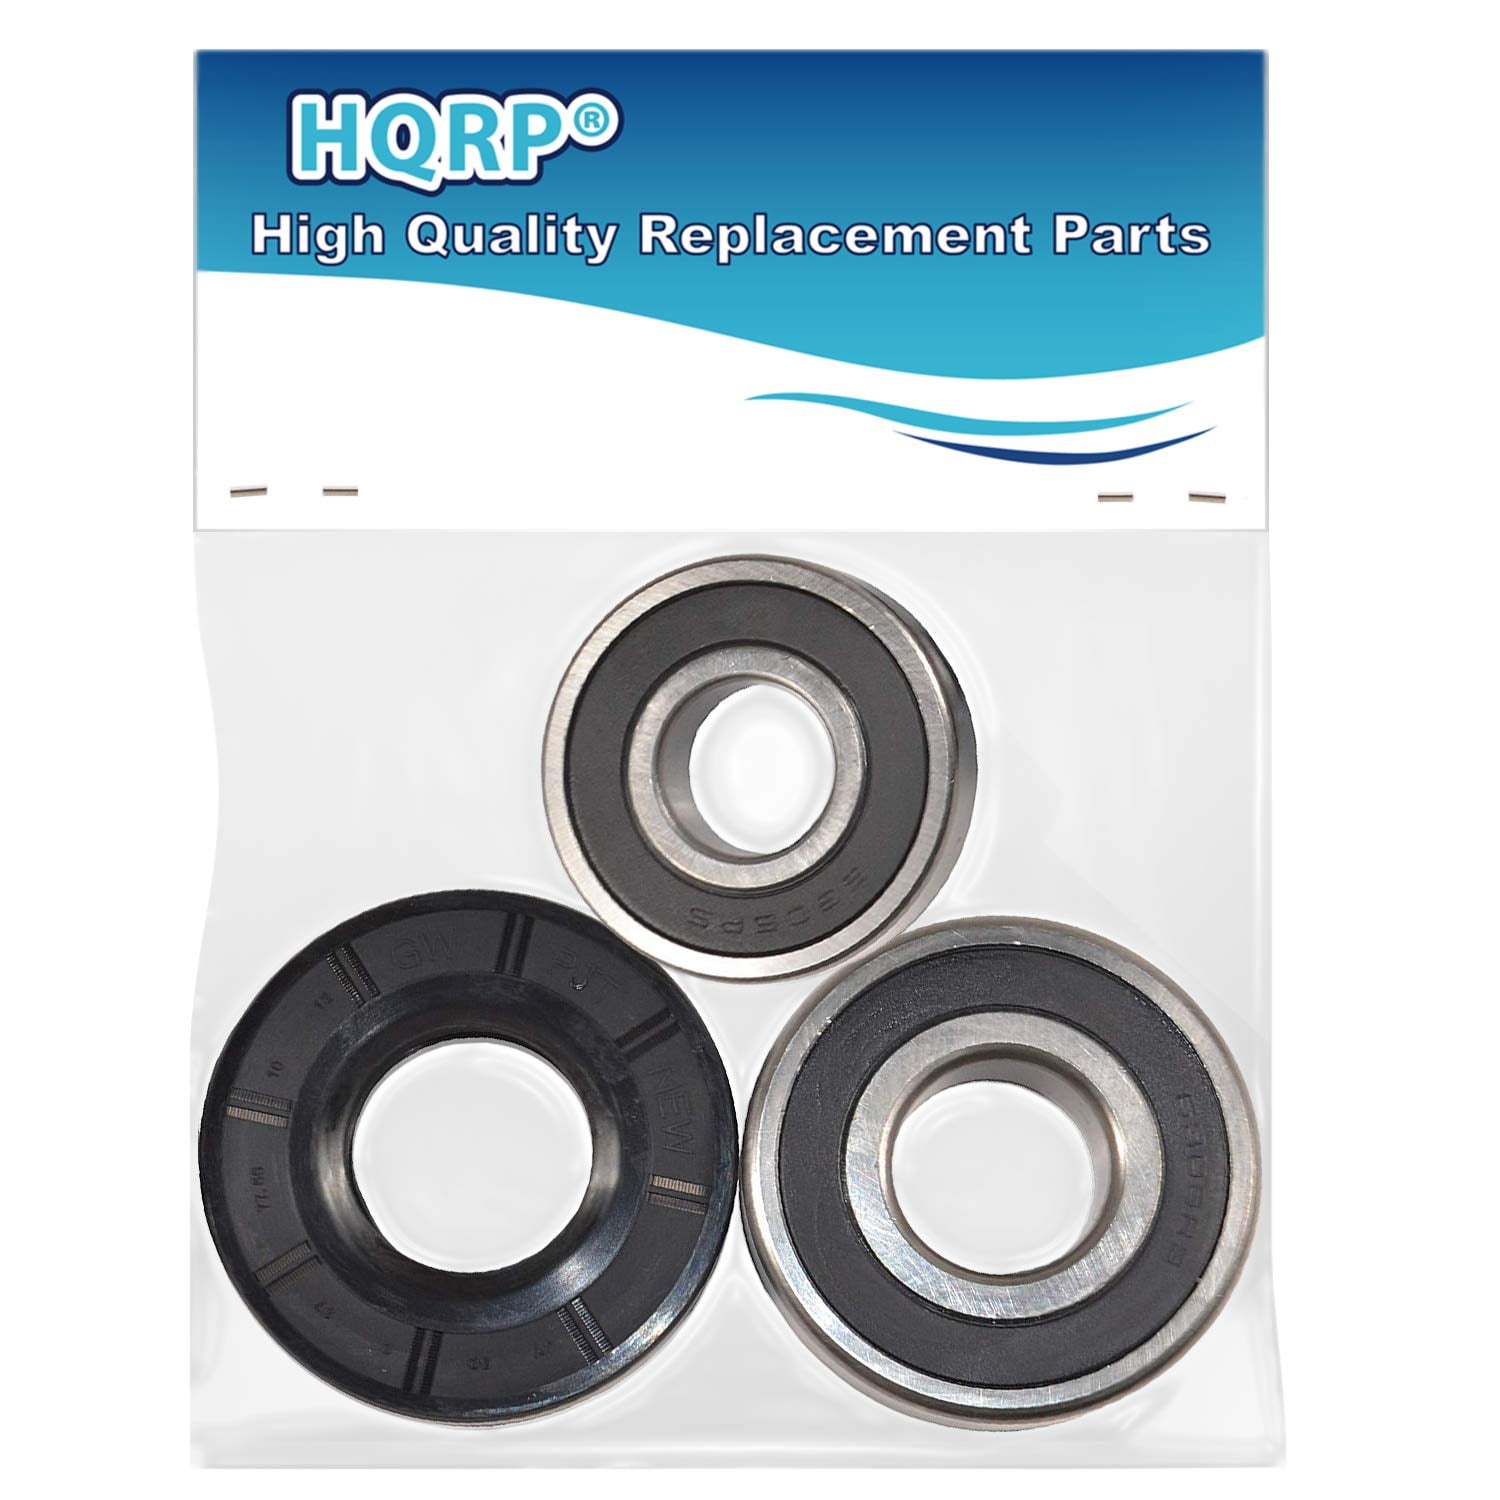 Details about   Bearing & Seal Kit replaces Whirlpool Duet & Maytag HE3 USPS PRIORITY SHIPPING 